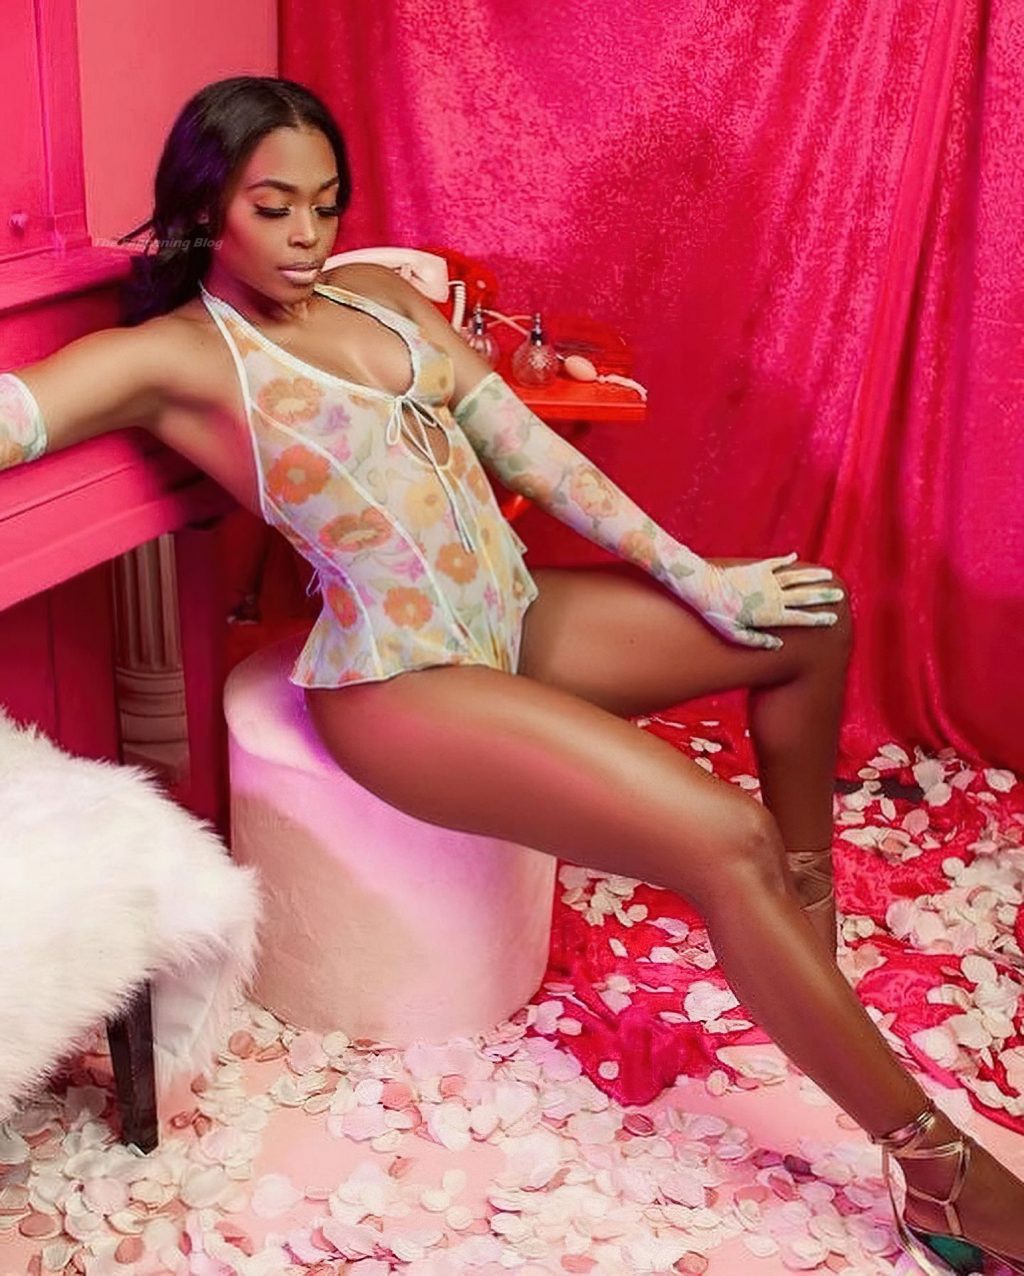 Nafessa Williams Shows Off Her Tits in Lingerie (9 Photos)